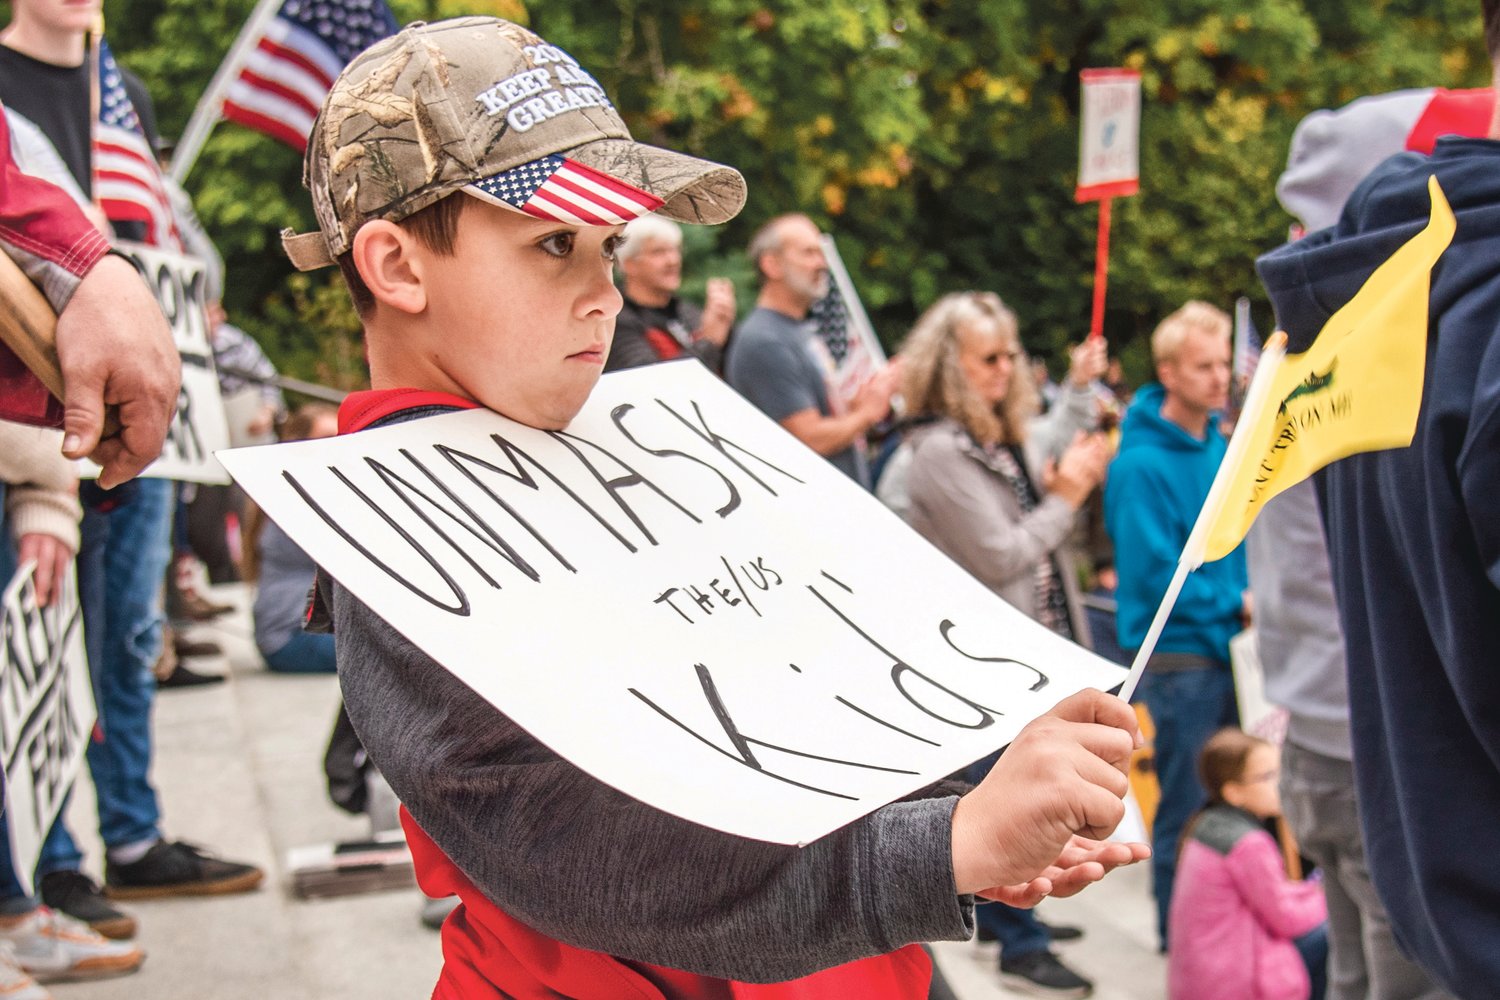 A young rally goer waves a flag while holding a sign that reads “Unmask the/us kids,” during a “Medical Freedom Rally” Sunday afternoon in Olympia.